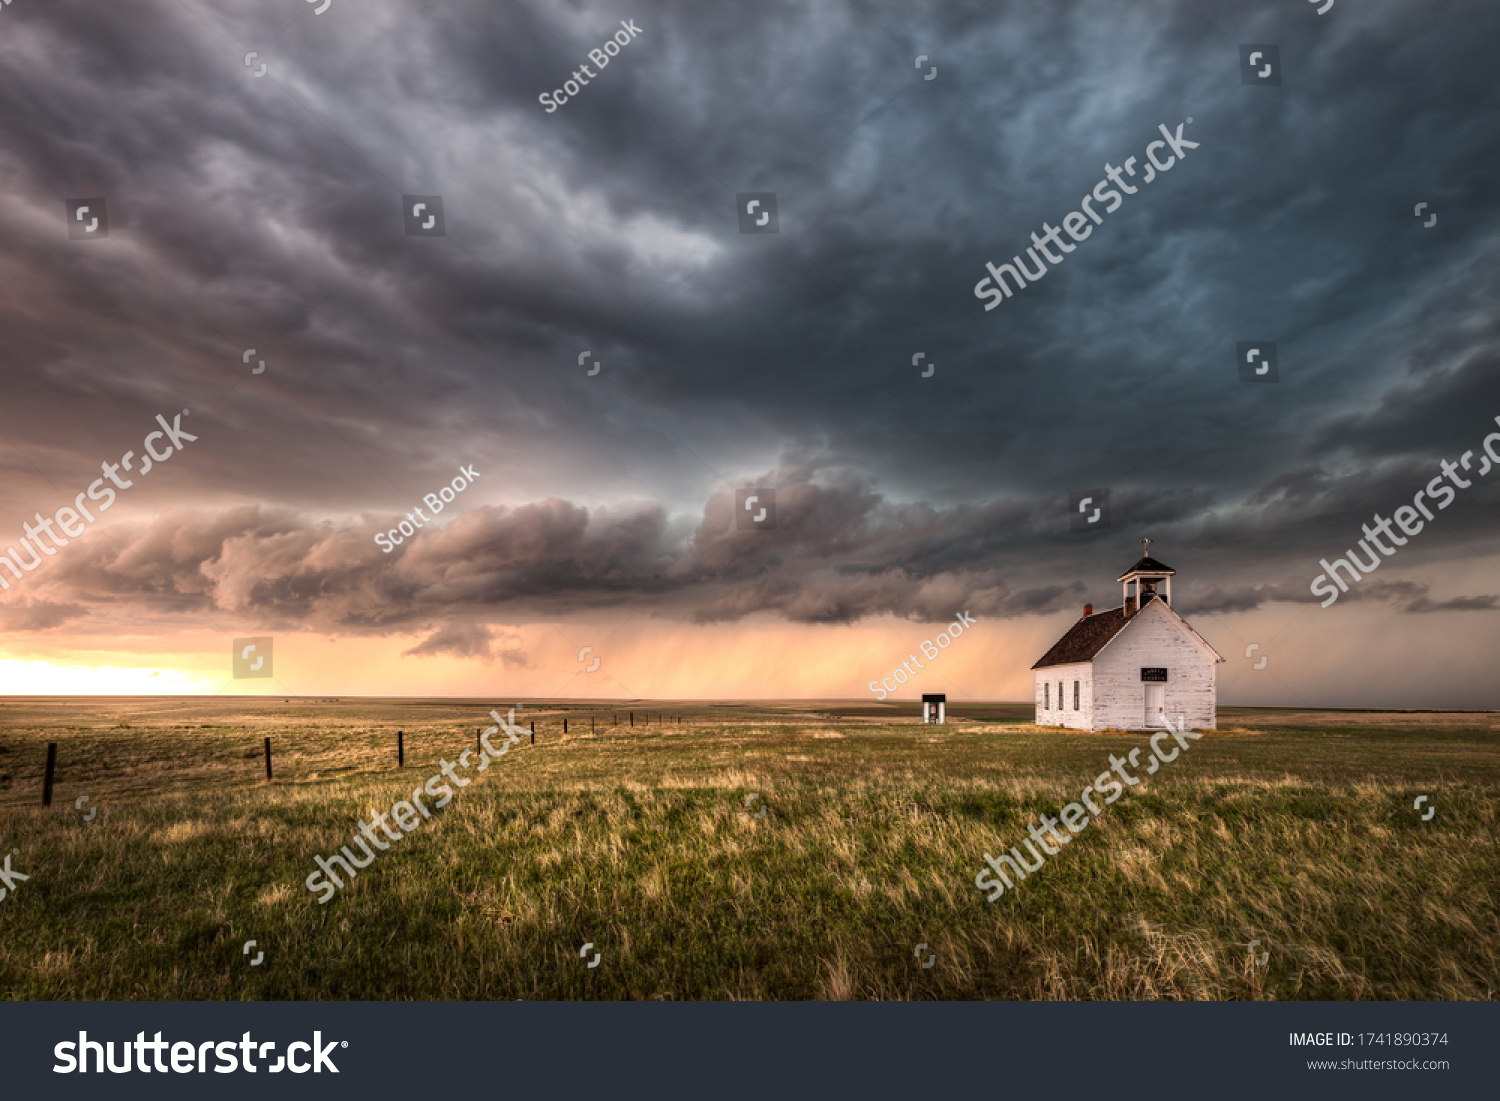 A severe thunderstorm approaches an old abandoned church in the countryside during the late afternoon in Colorado.  #1741890374